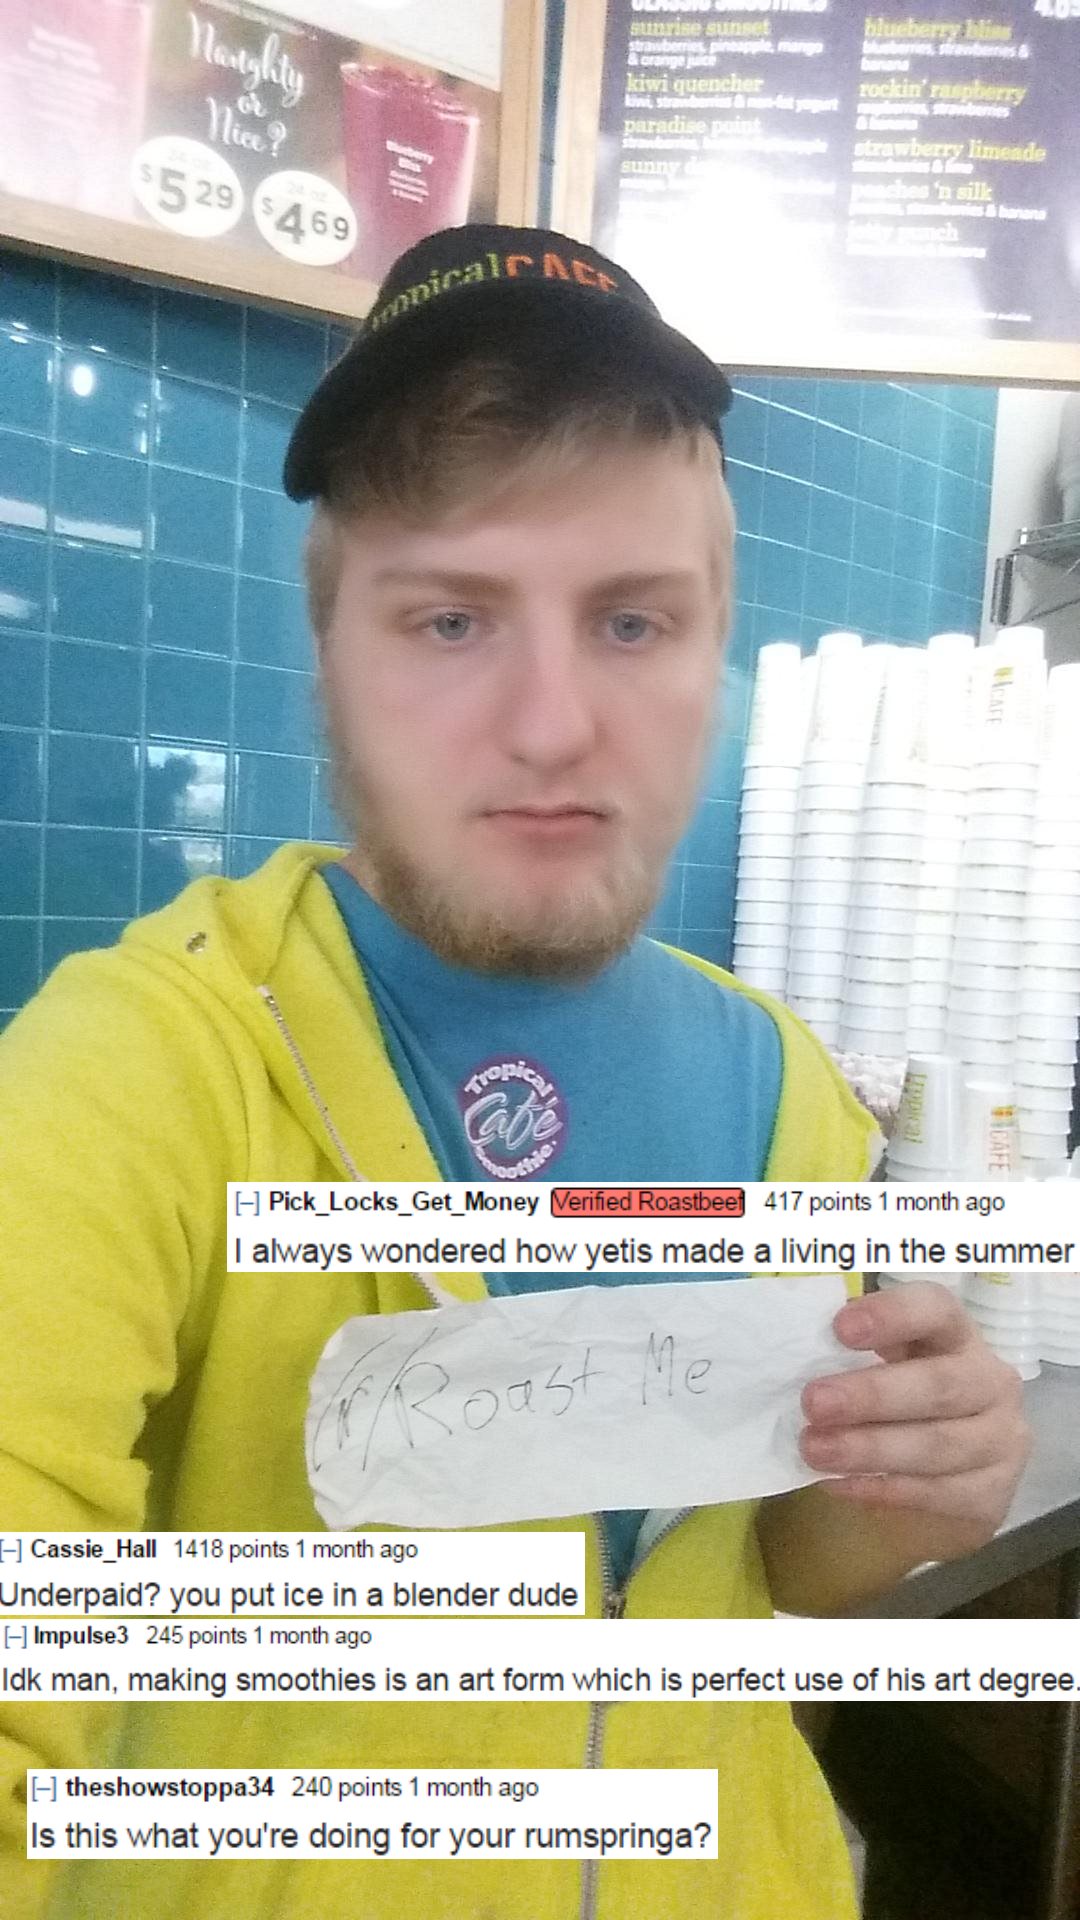 roast me dude - Sunrise Sunset blueber luglily & crane kiwi quencher rockin' raspberry 6 paradise pui berry limeade 5529 469 illa n sill I Pick_Locks_Get_Money Verified Roastbeef 417 points 1 month ago I always wondered how yetis made a living in the summ